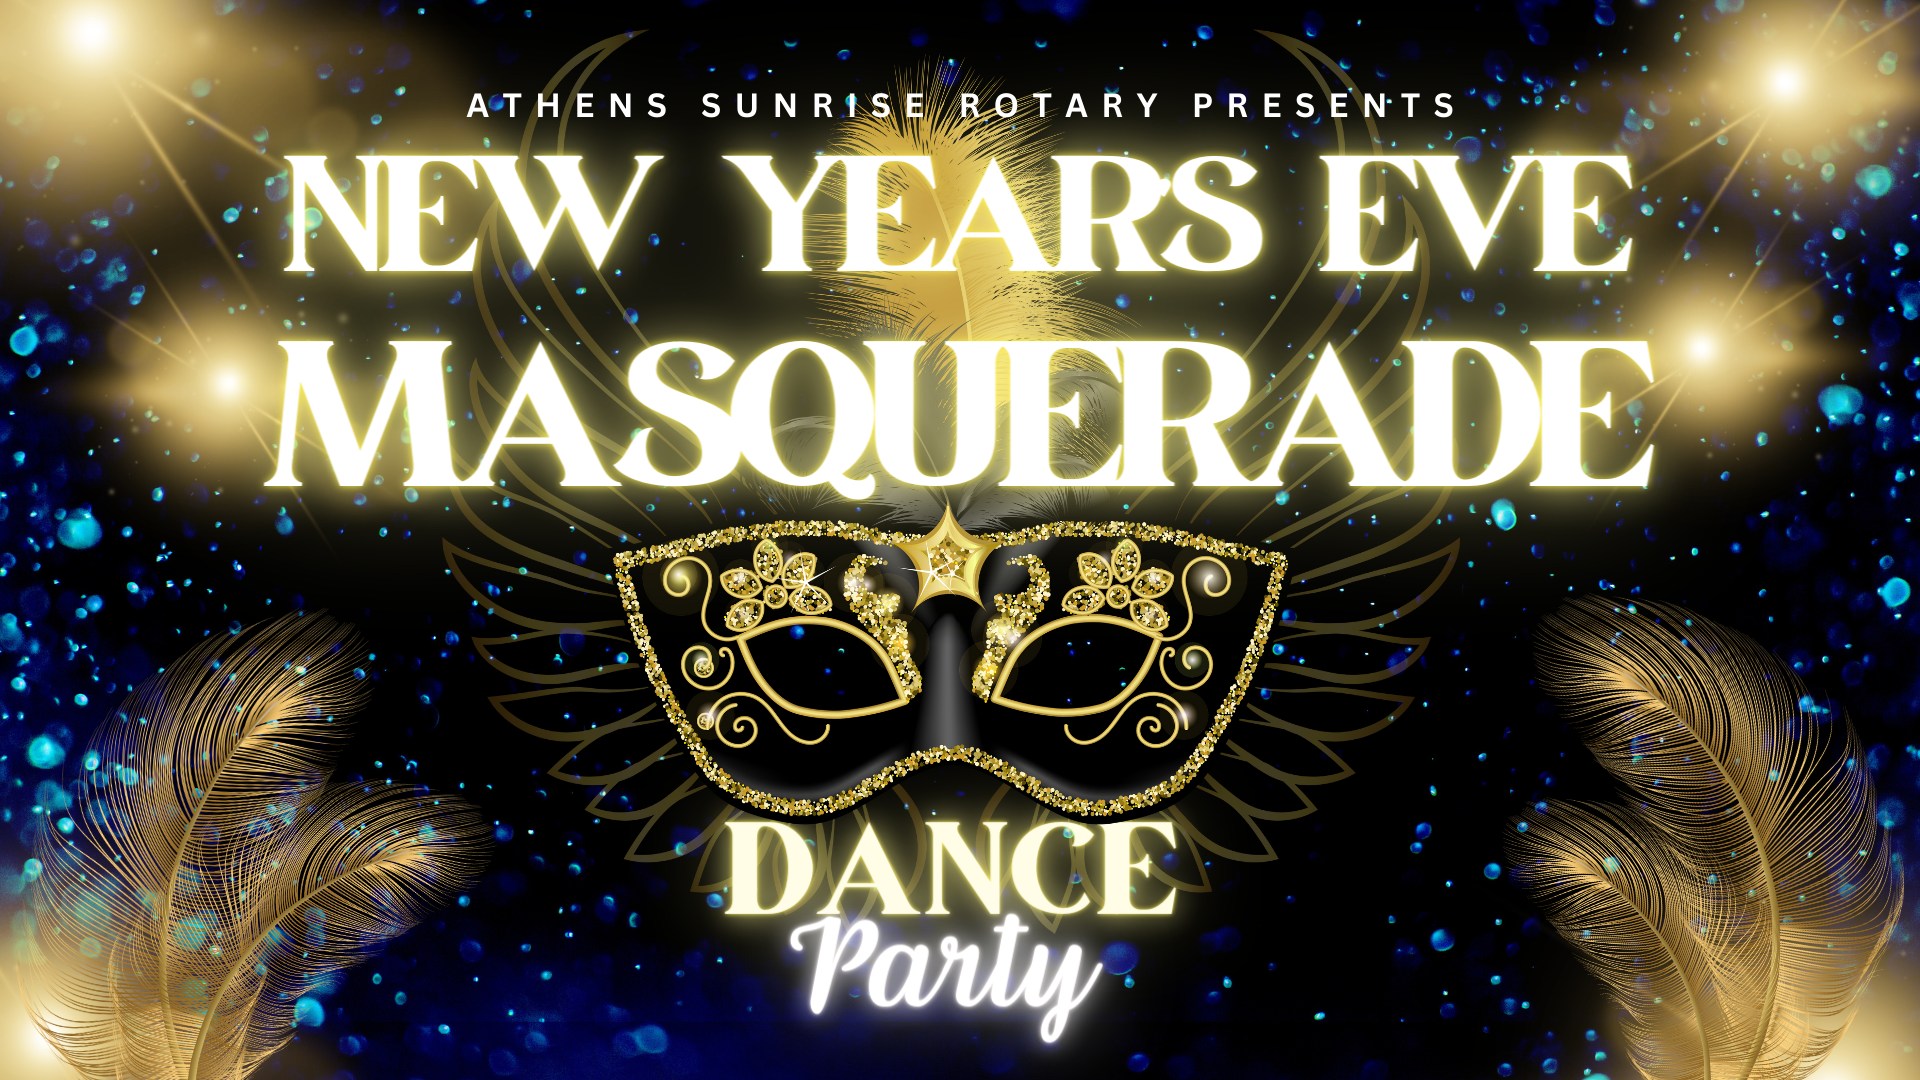 An image of a graphic promoting the New Years Eve Masquerade. The image is black with gold accents.